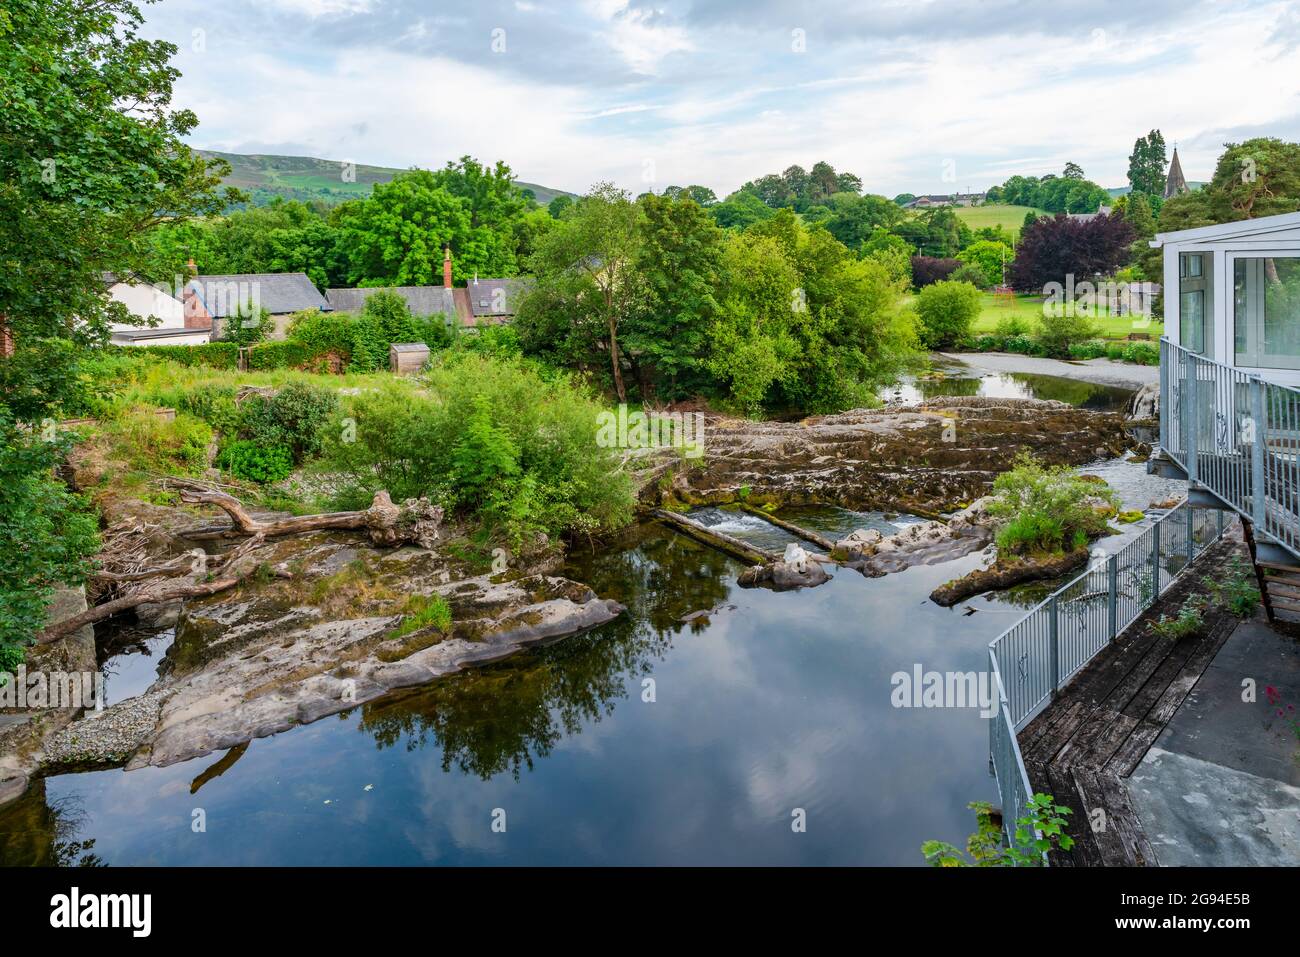 View of the River Wye in Rhayader, Elan Valley, Wales Stock Photo